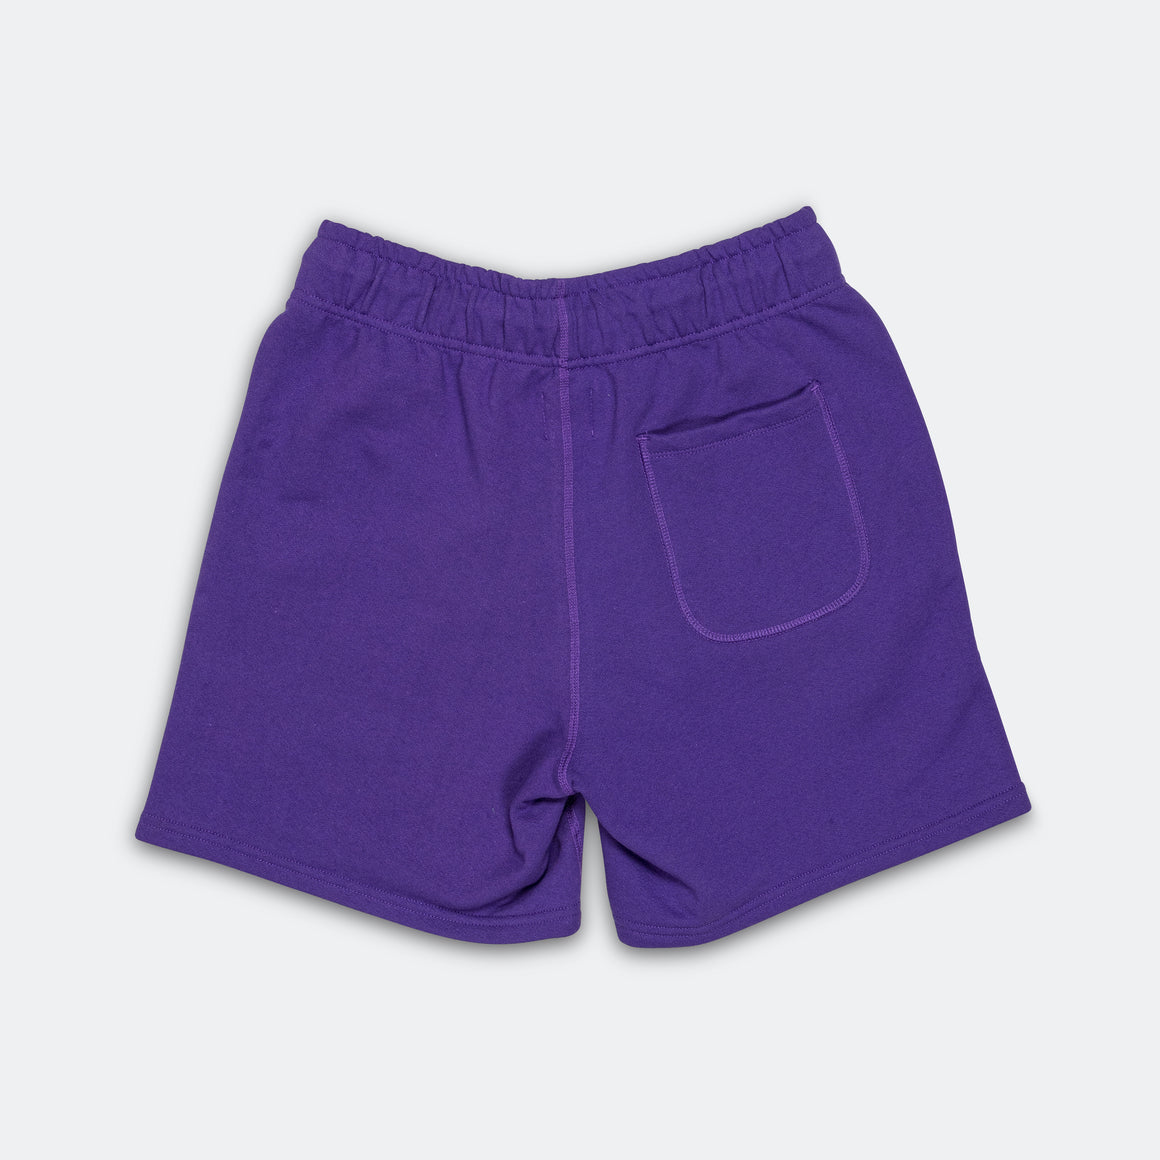 New Balance - MADE in USA Sweat Short - Prism Purple - UP THERE